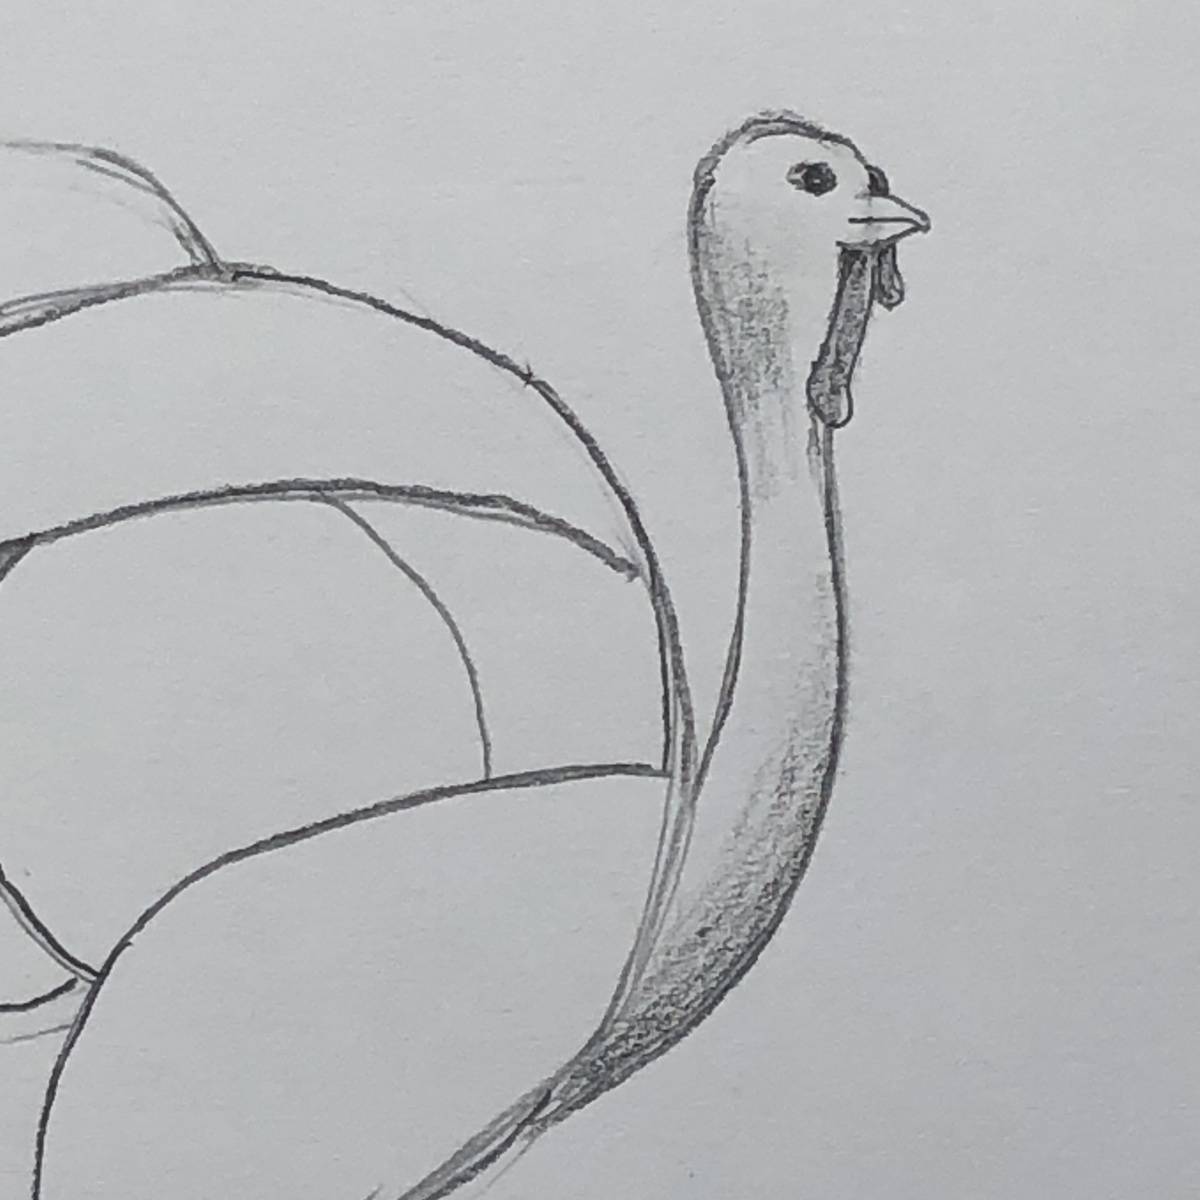 Beginning line-drawing sketch of a turkey, close up on the head, with eye, snood, and wattle drawn in and shading on the neck.